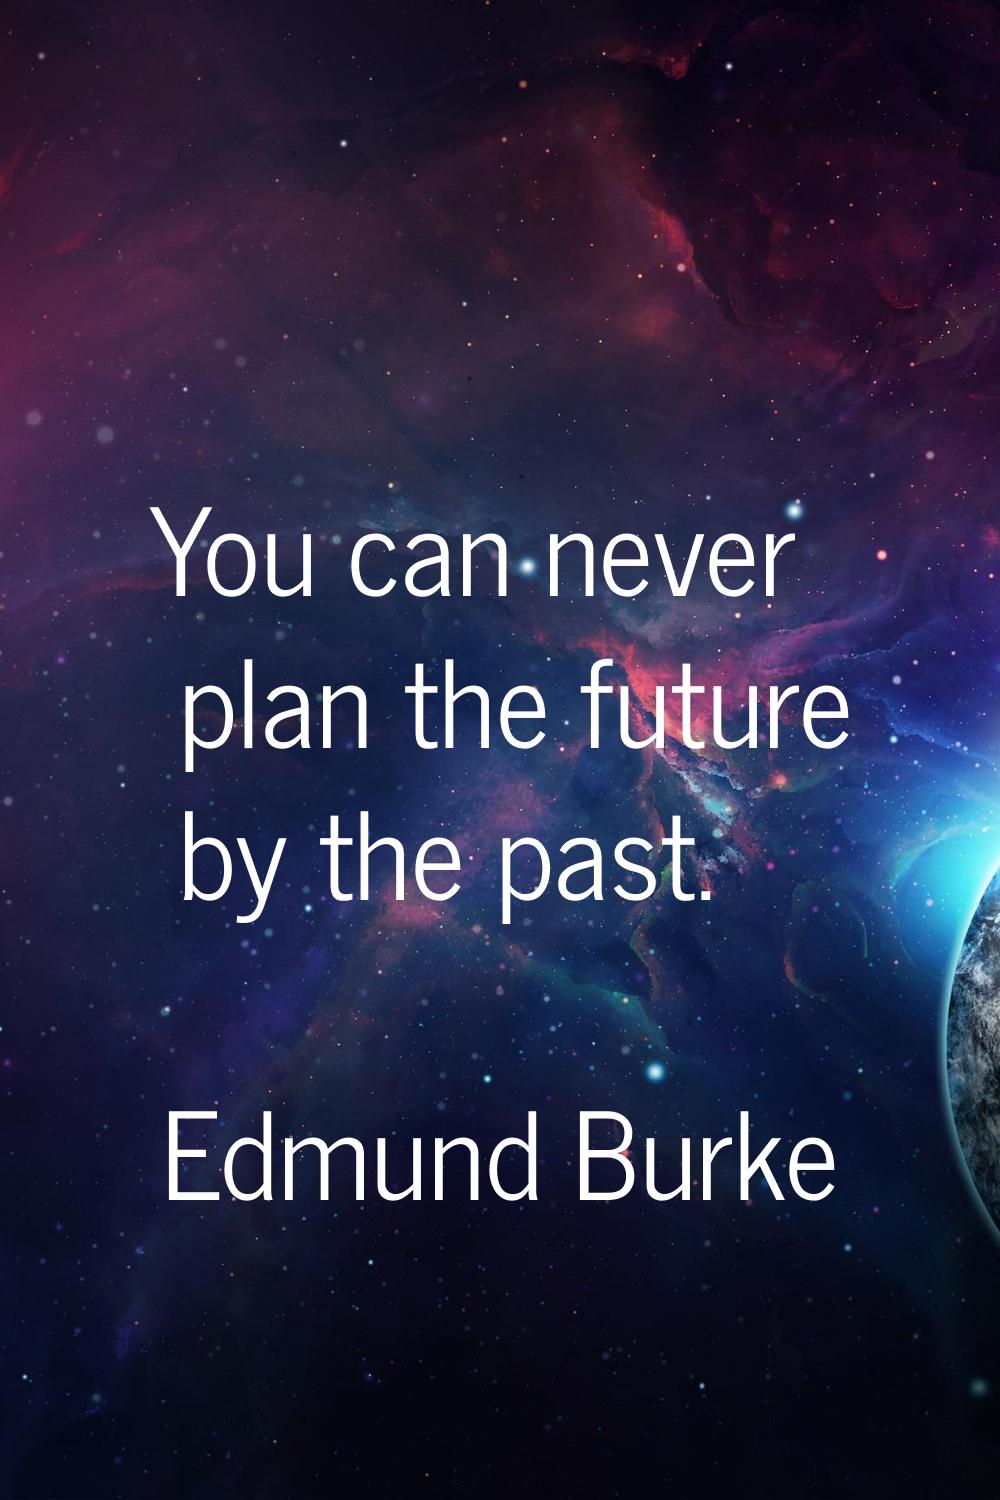 You can never plan the future by the past.